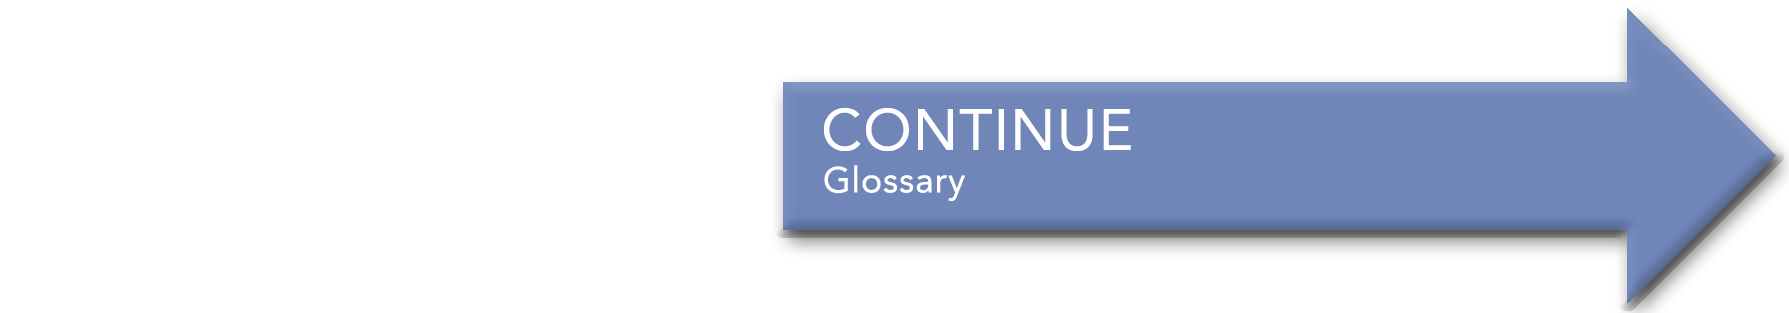 Continue to Glossary